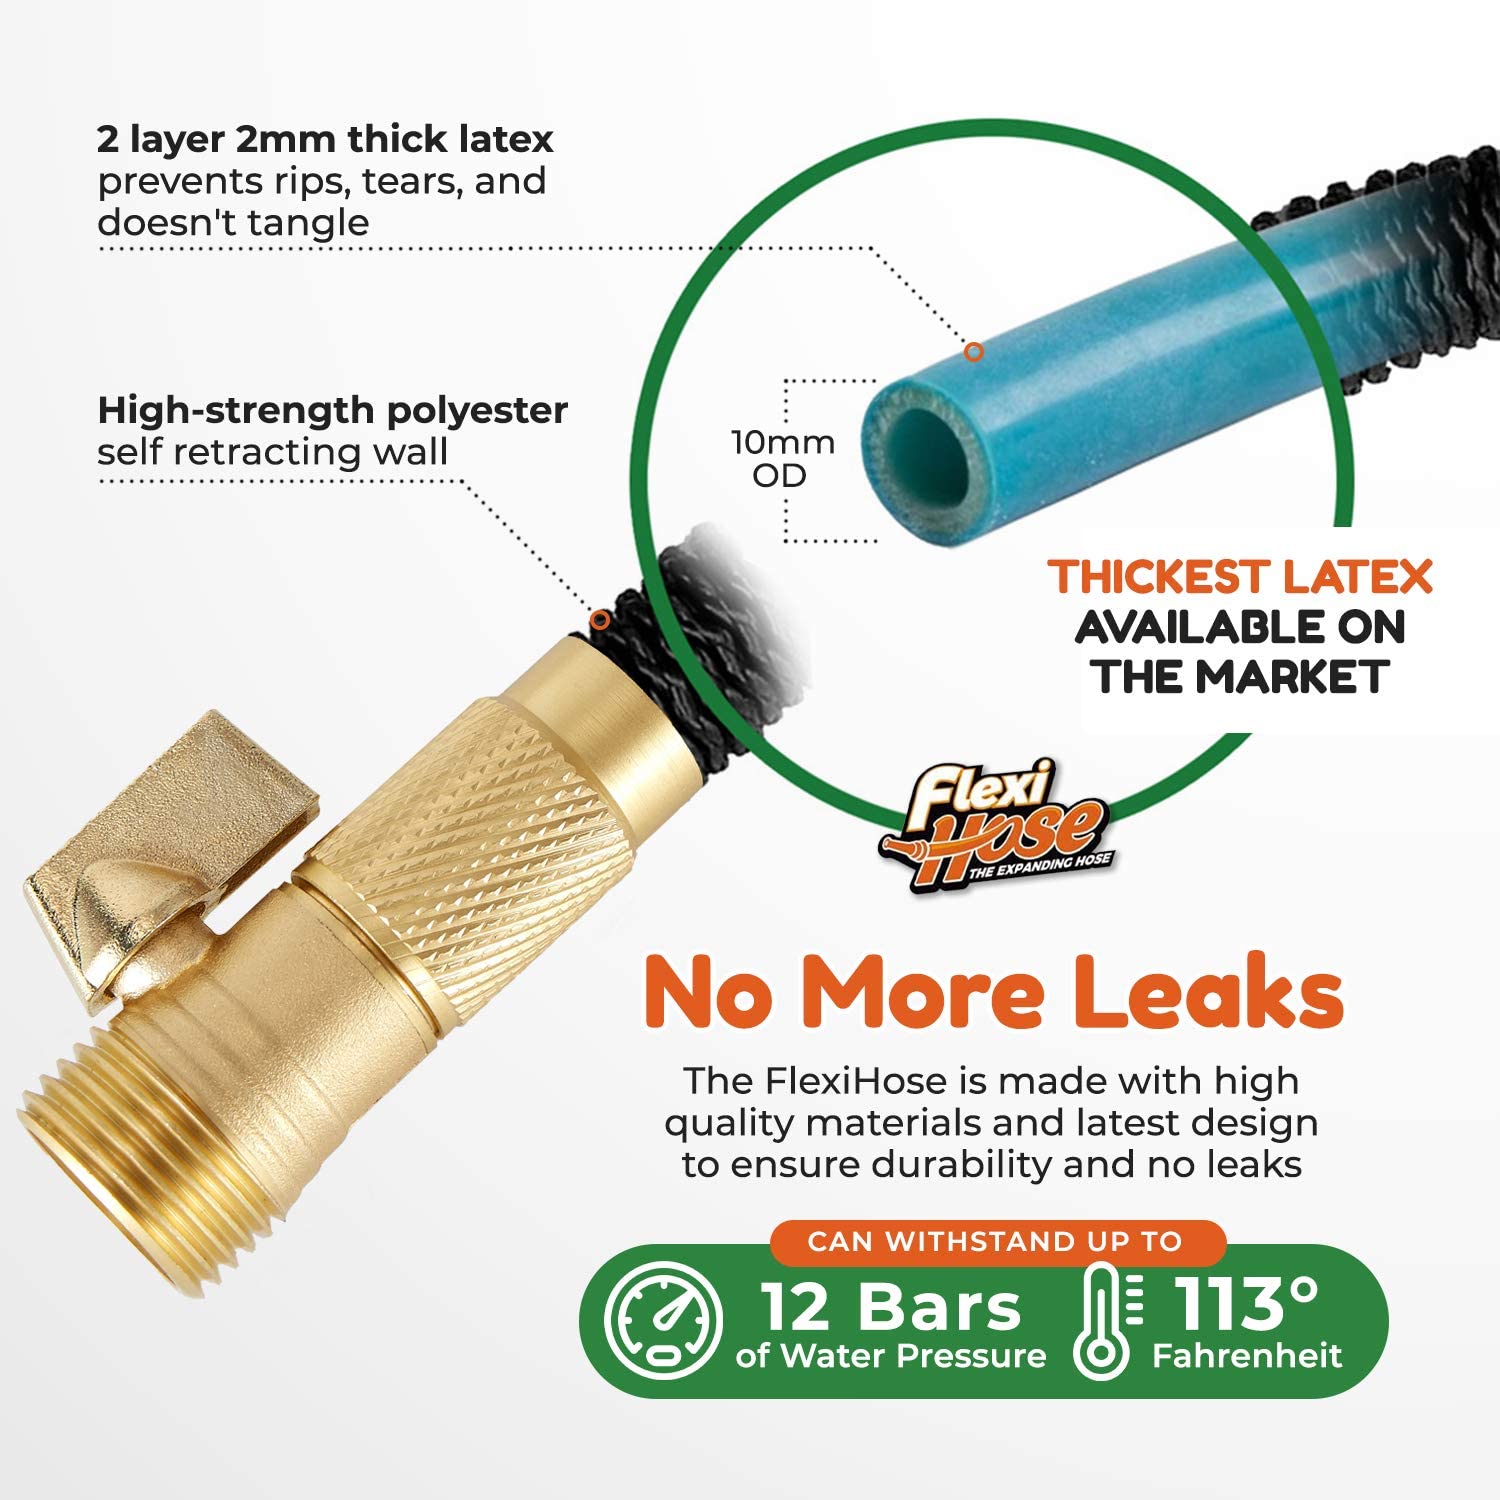 Flexi Hose with 8 Function Nozzle, Lightweight Expandable Garden Hose, No-Kink Flexibility, 3/4 Inch Solid Brass Fittings - image 2 of 8